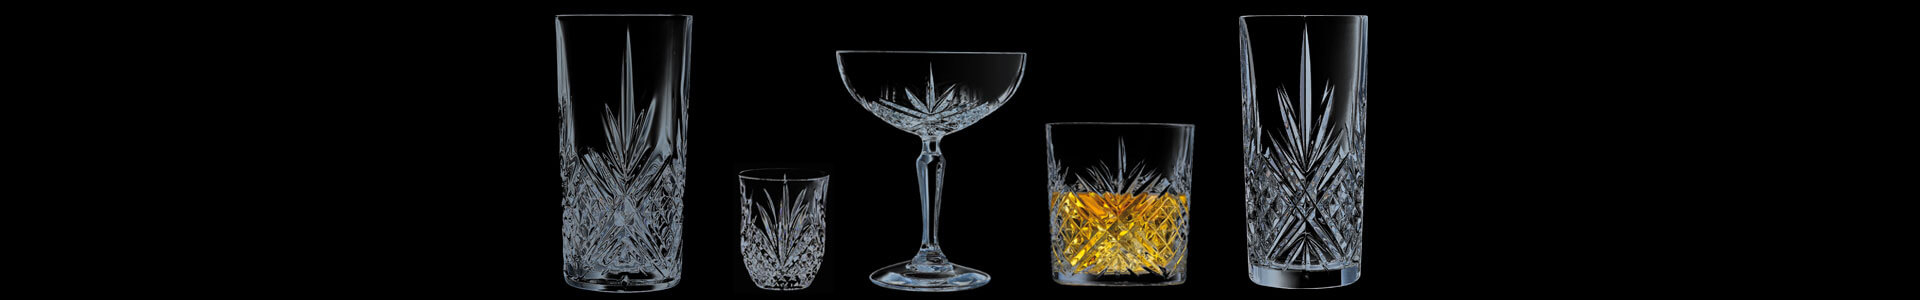 Cocktail glasses from the Broadway series by Arcoroc.